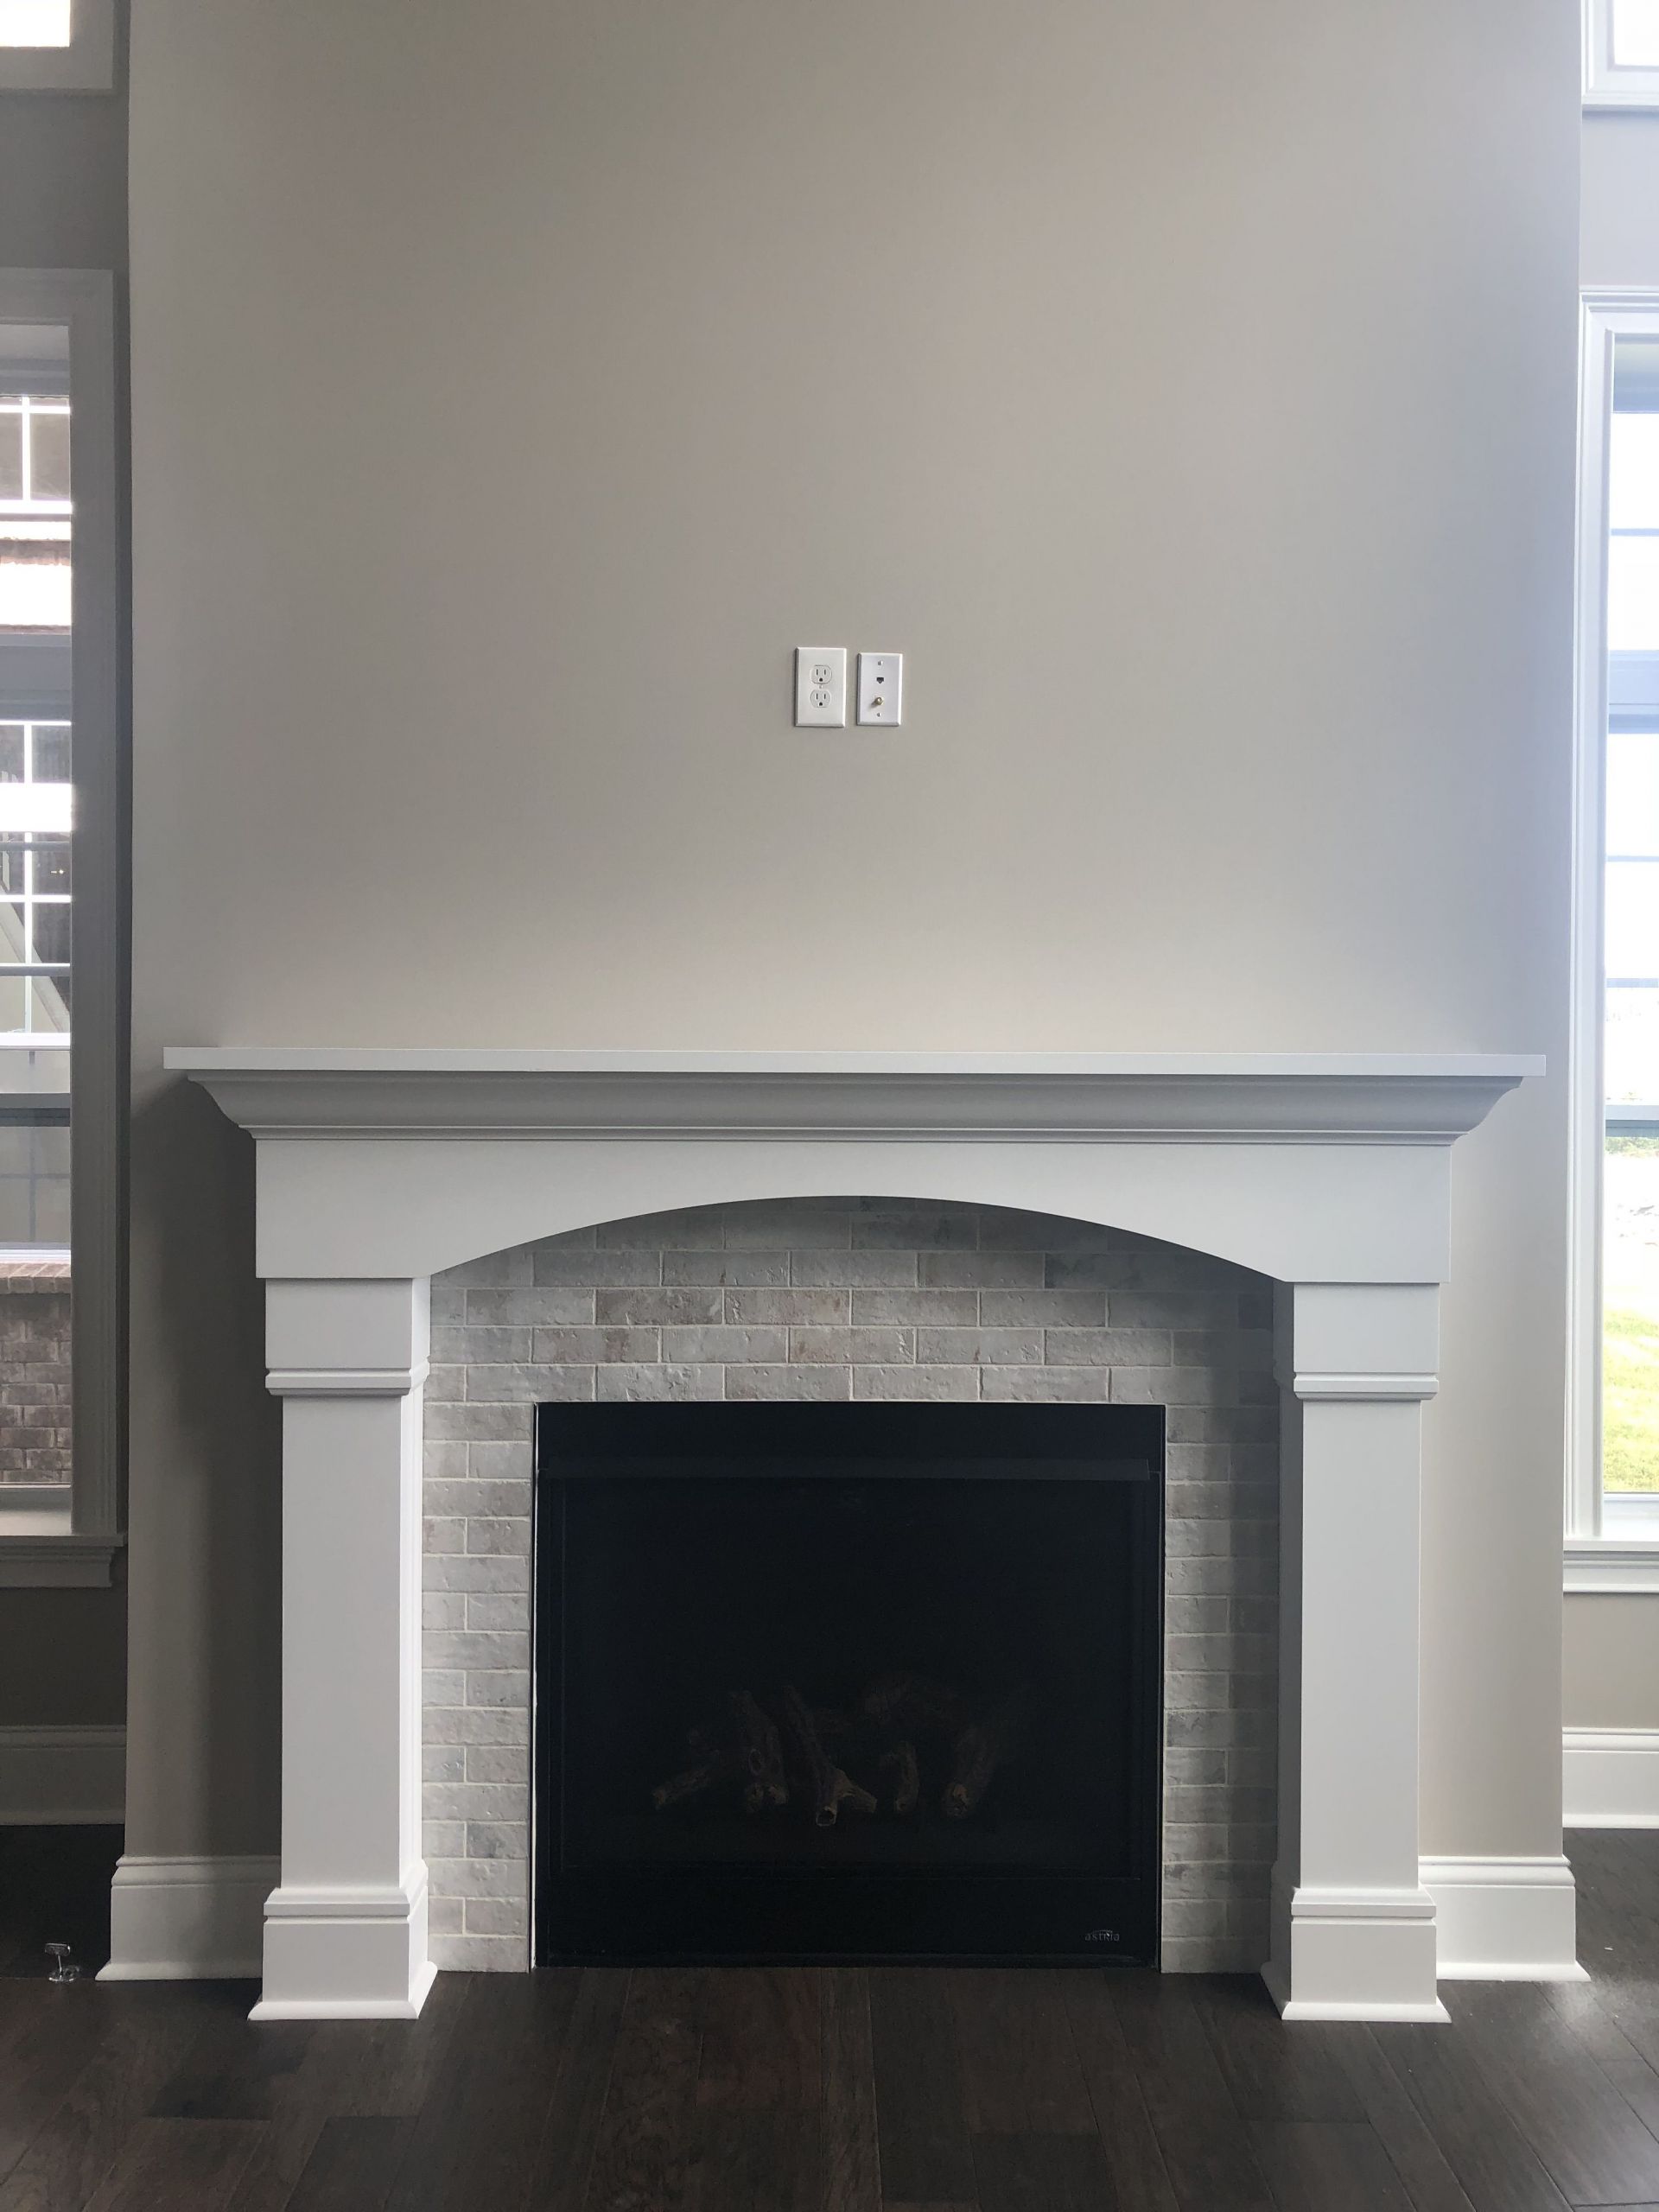 fireplace tile surround best of mantle 2 brickwork 2x8 studio tile surround of fireplace tile surround